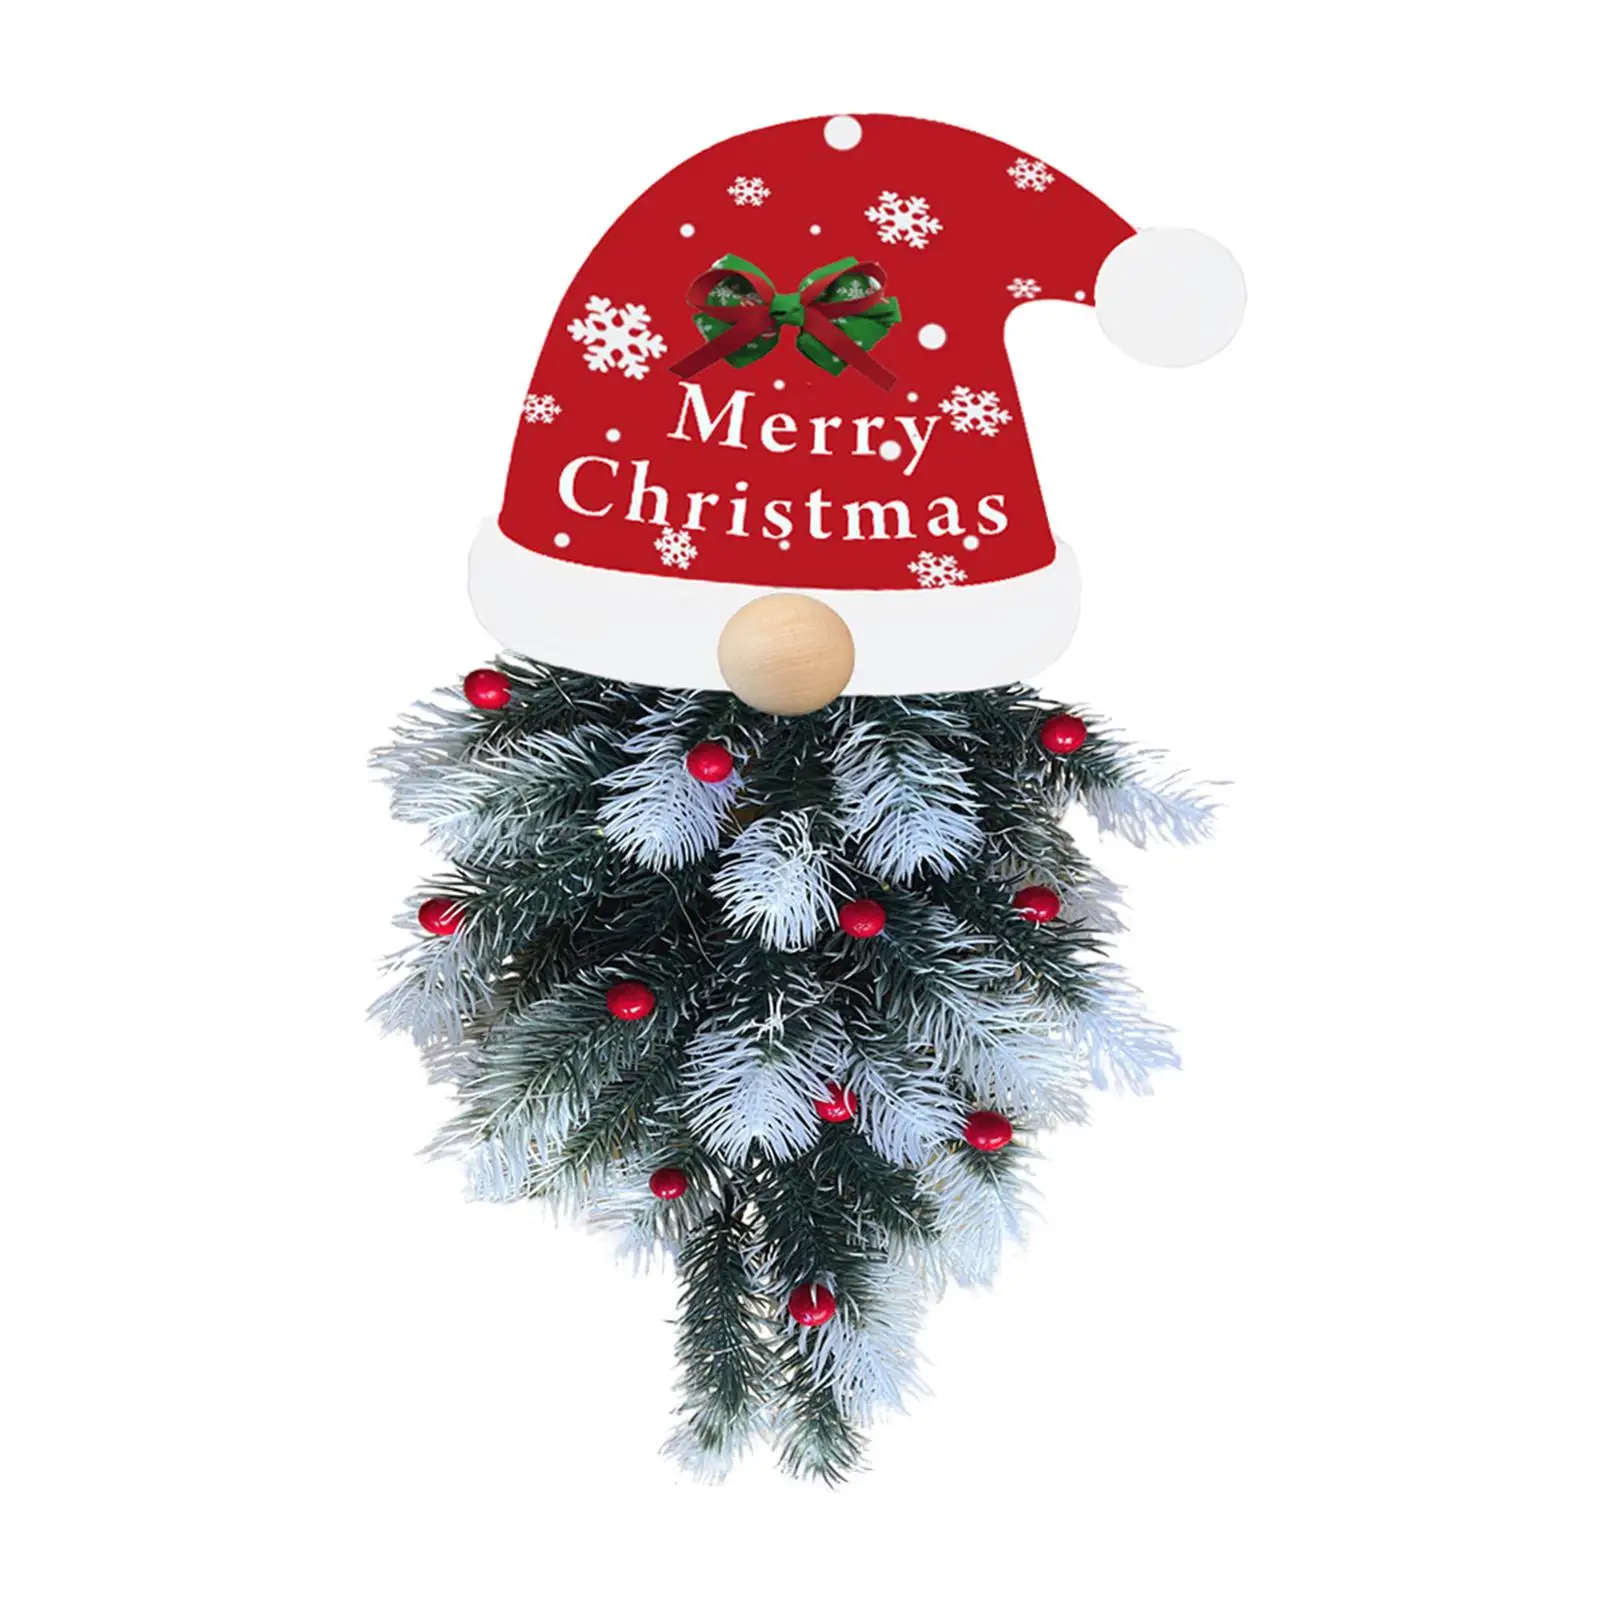 Artificial Christmas Swag with Lights Christmas Garland Swag for Outside